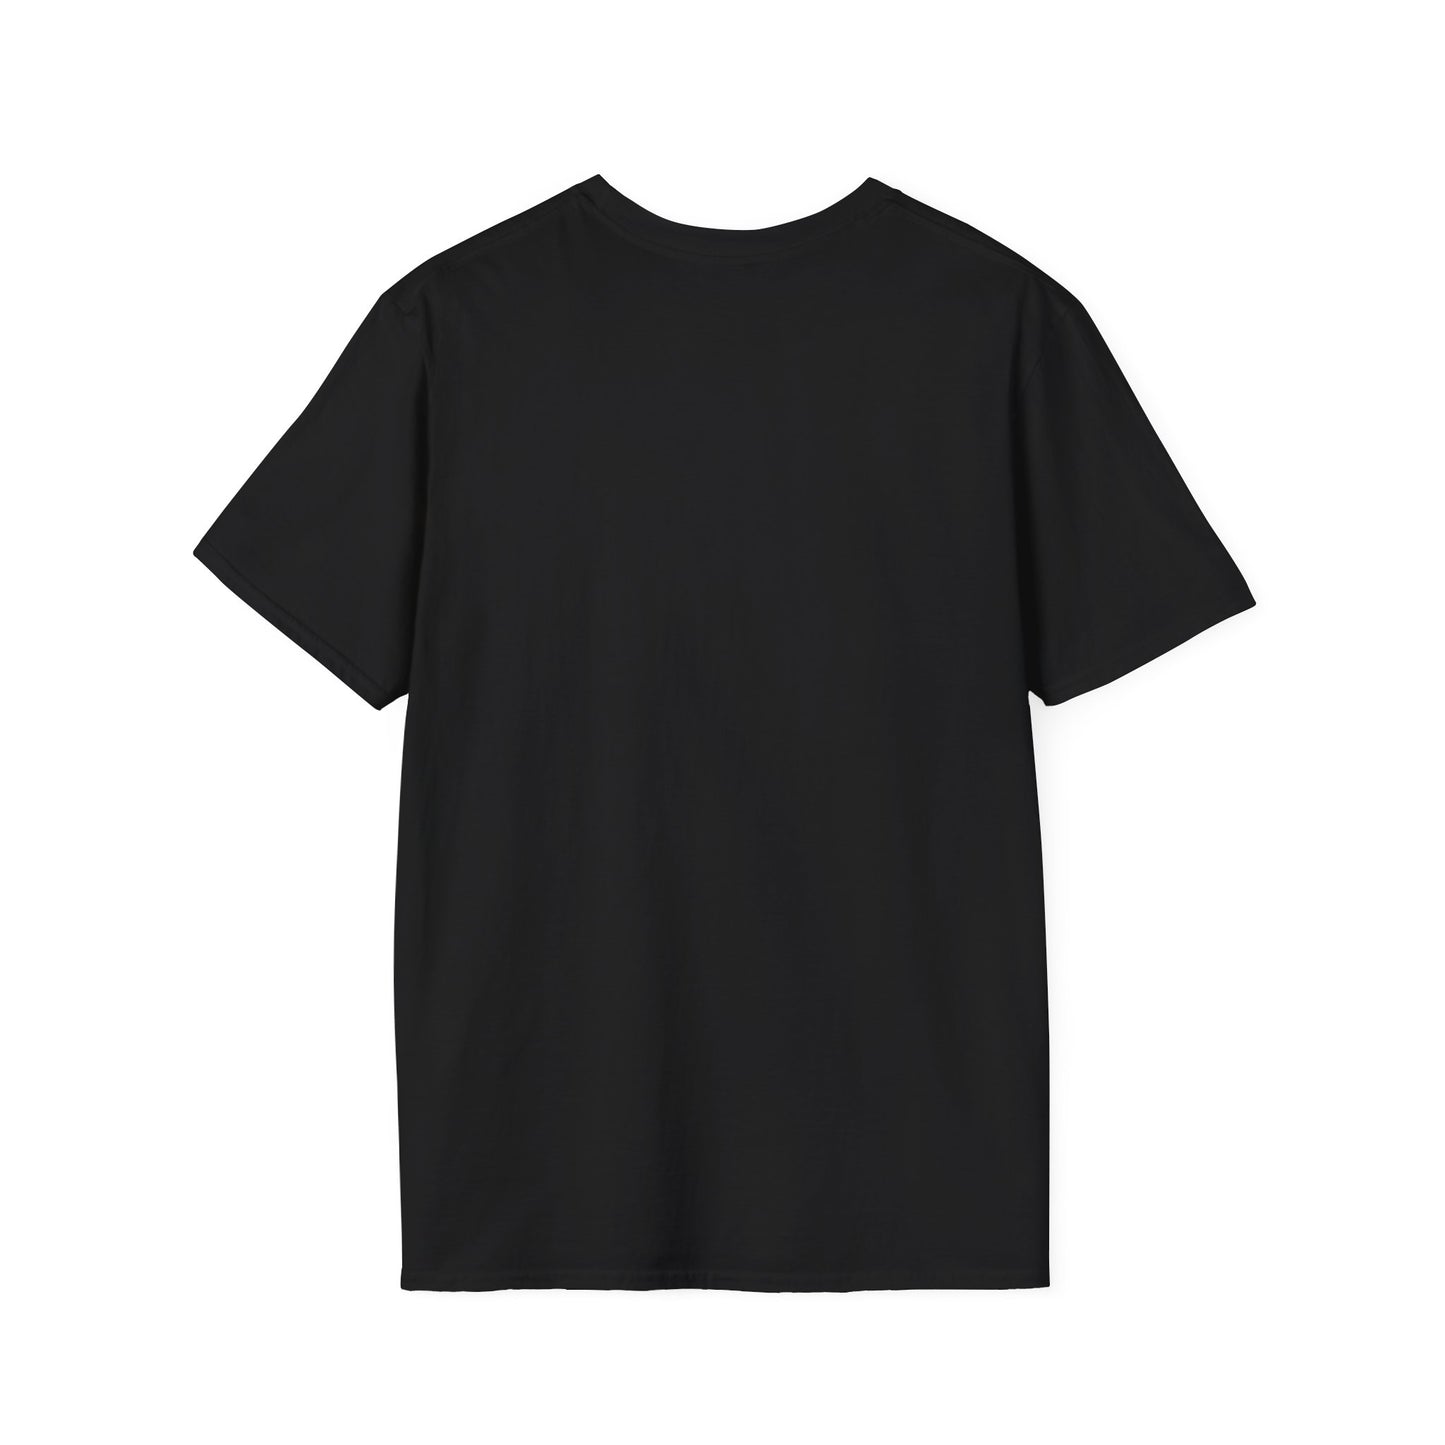 Movement Therapy - Soft Style Tee